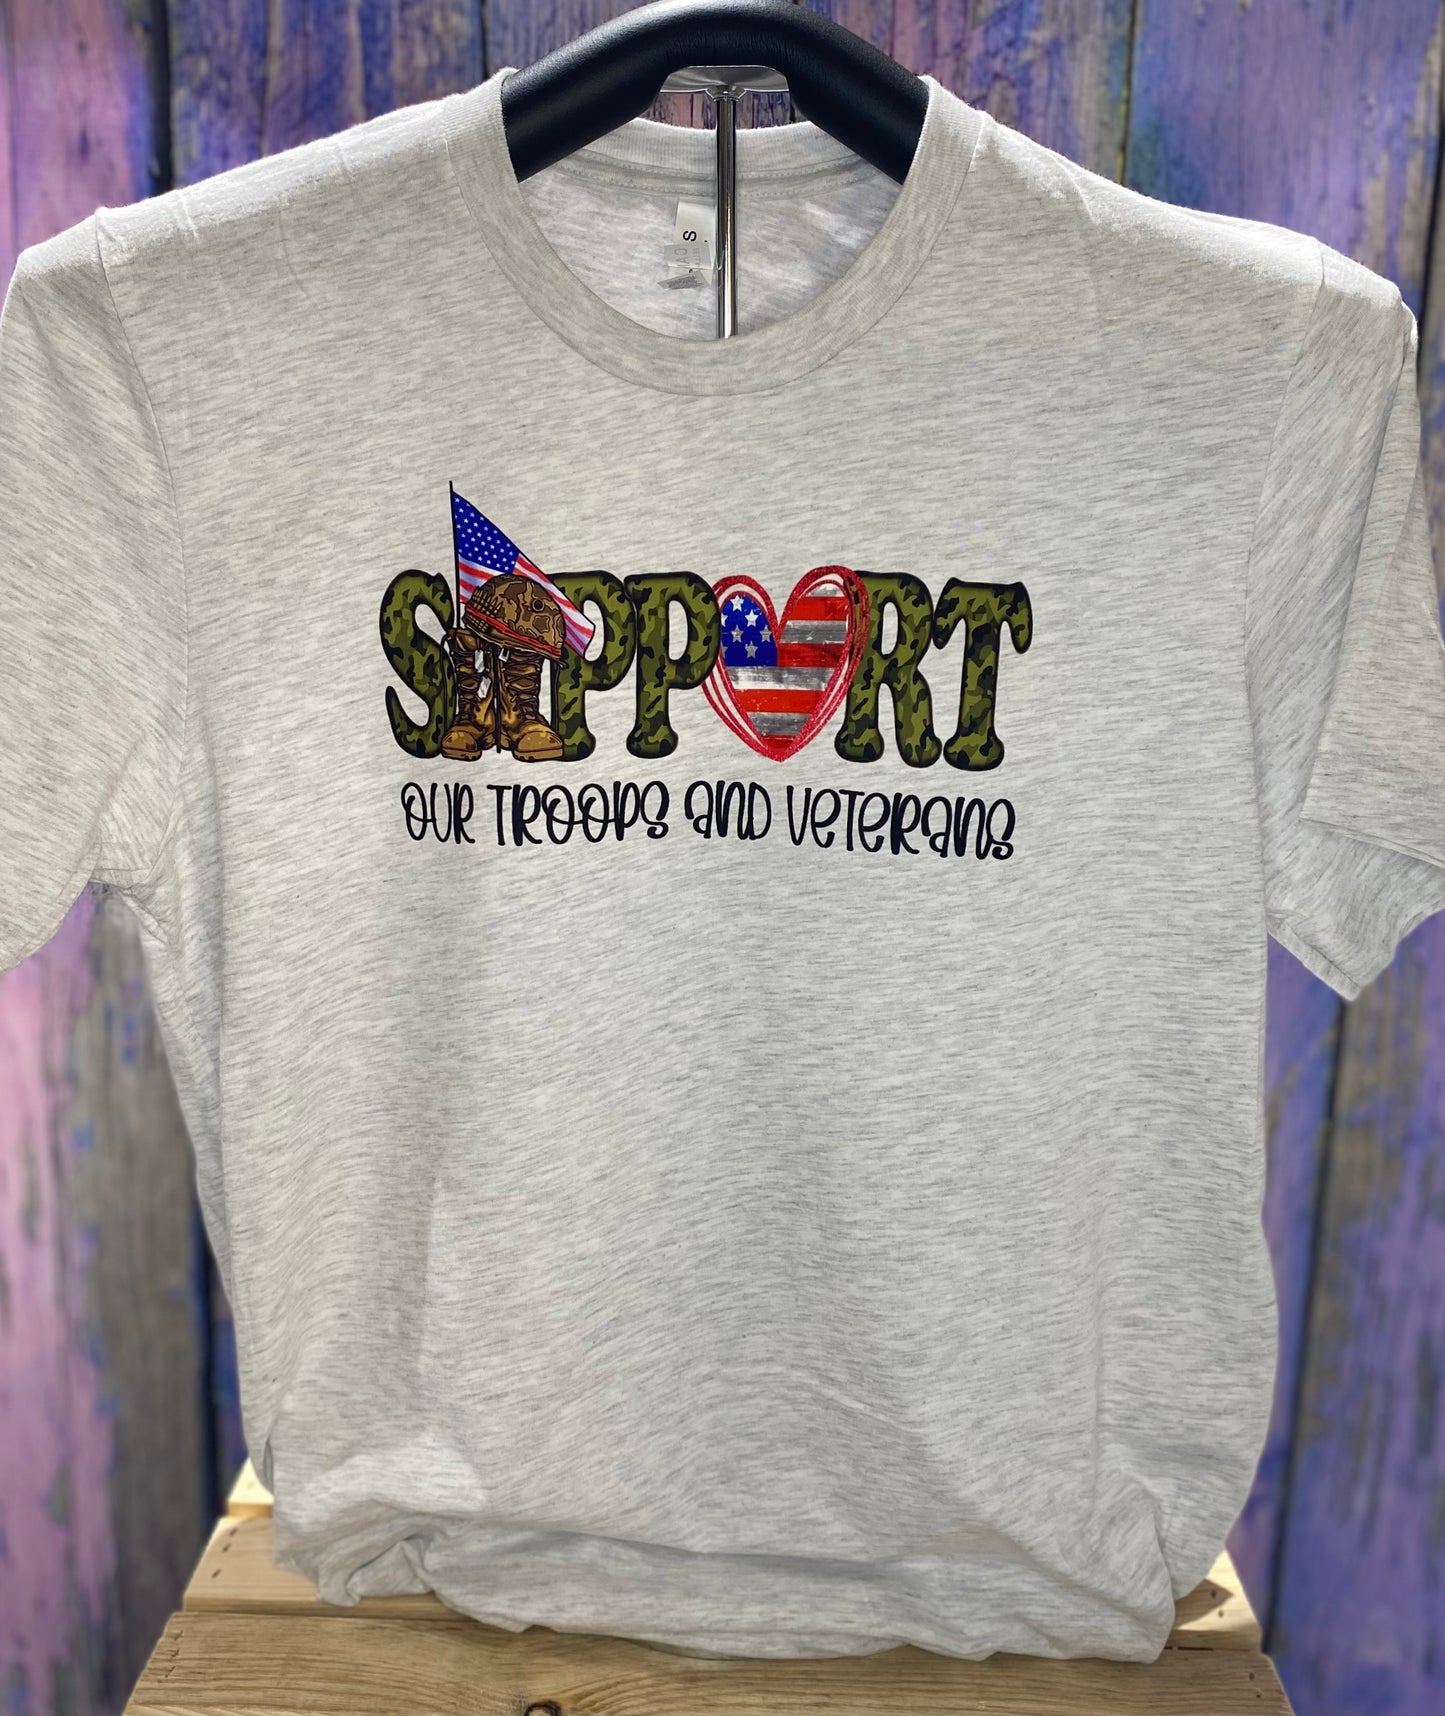 Support Our Troops & Veterans Tee